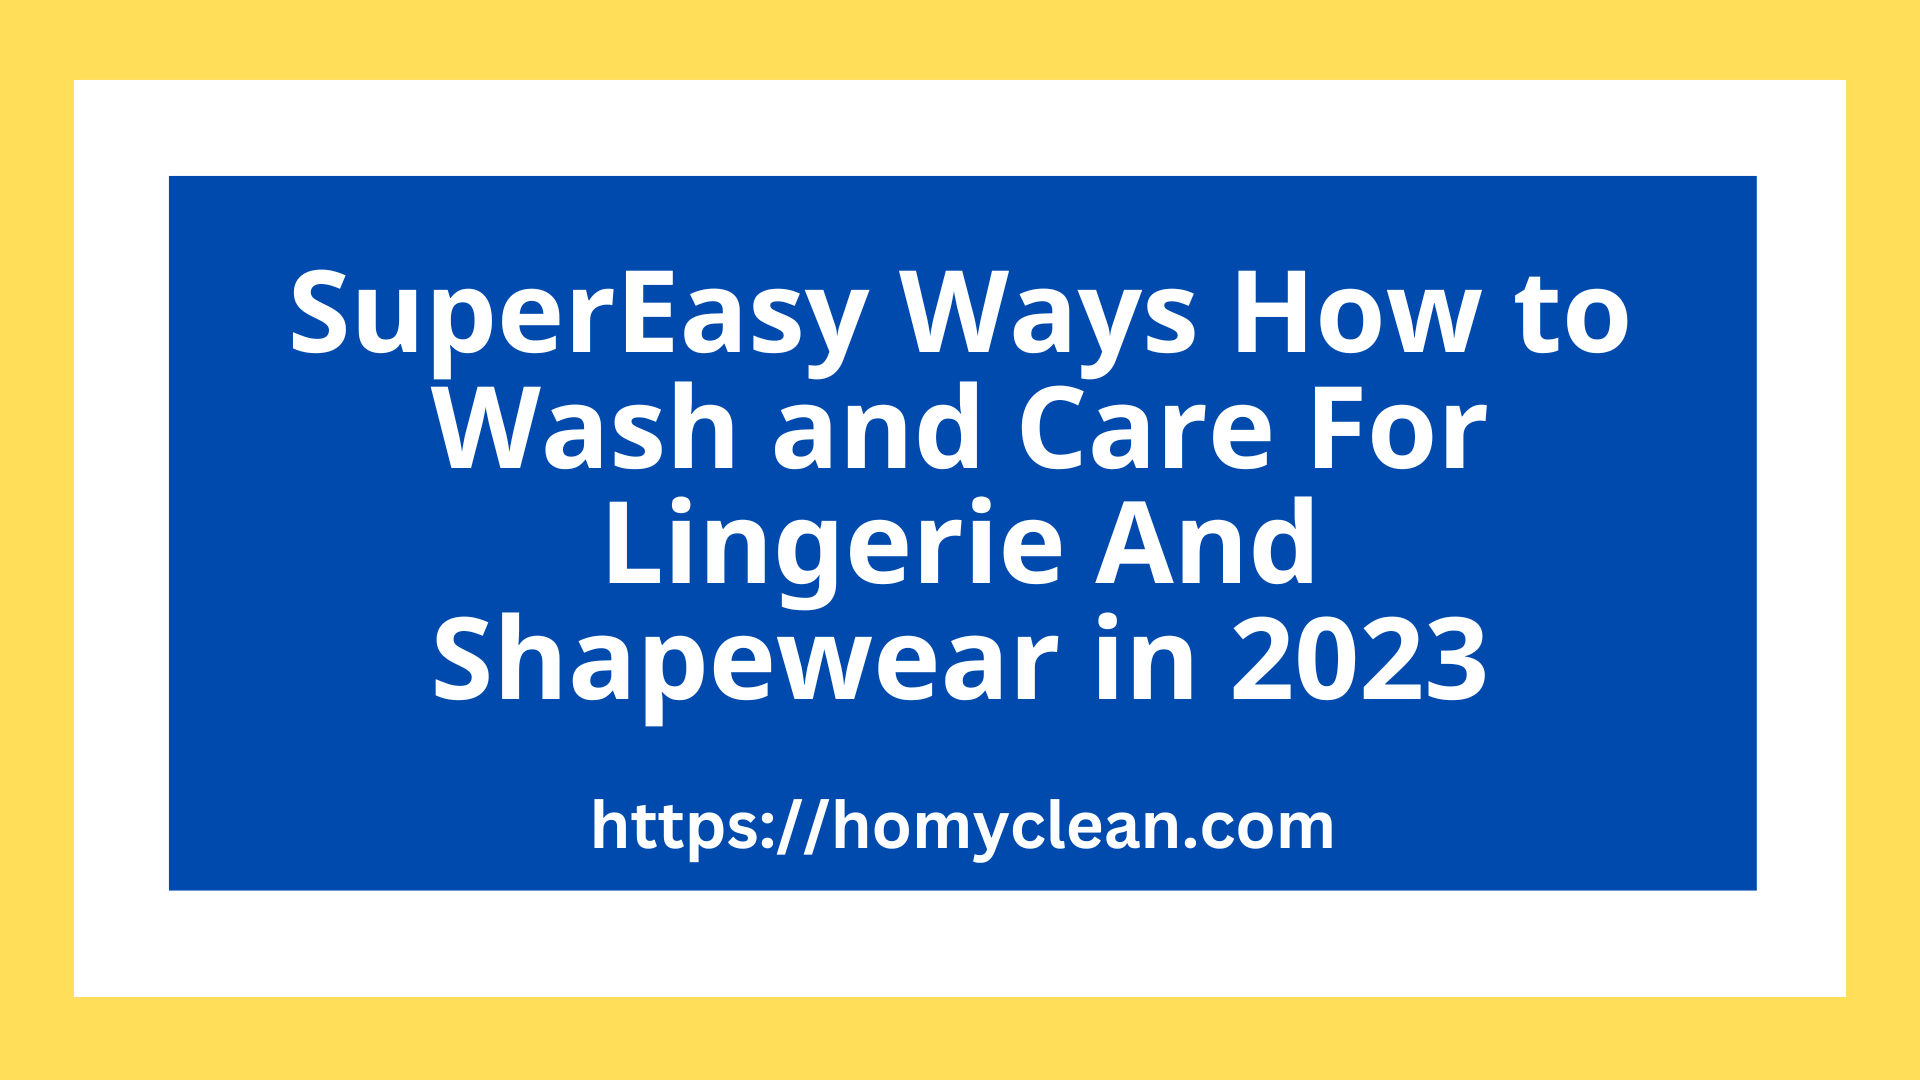 How to Wash and Care Lingerie And Shapewear